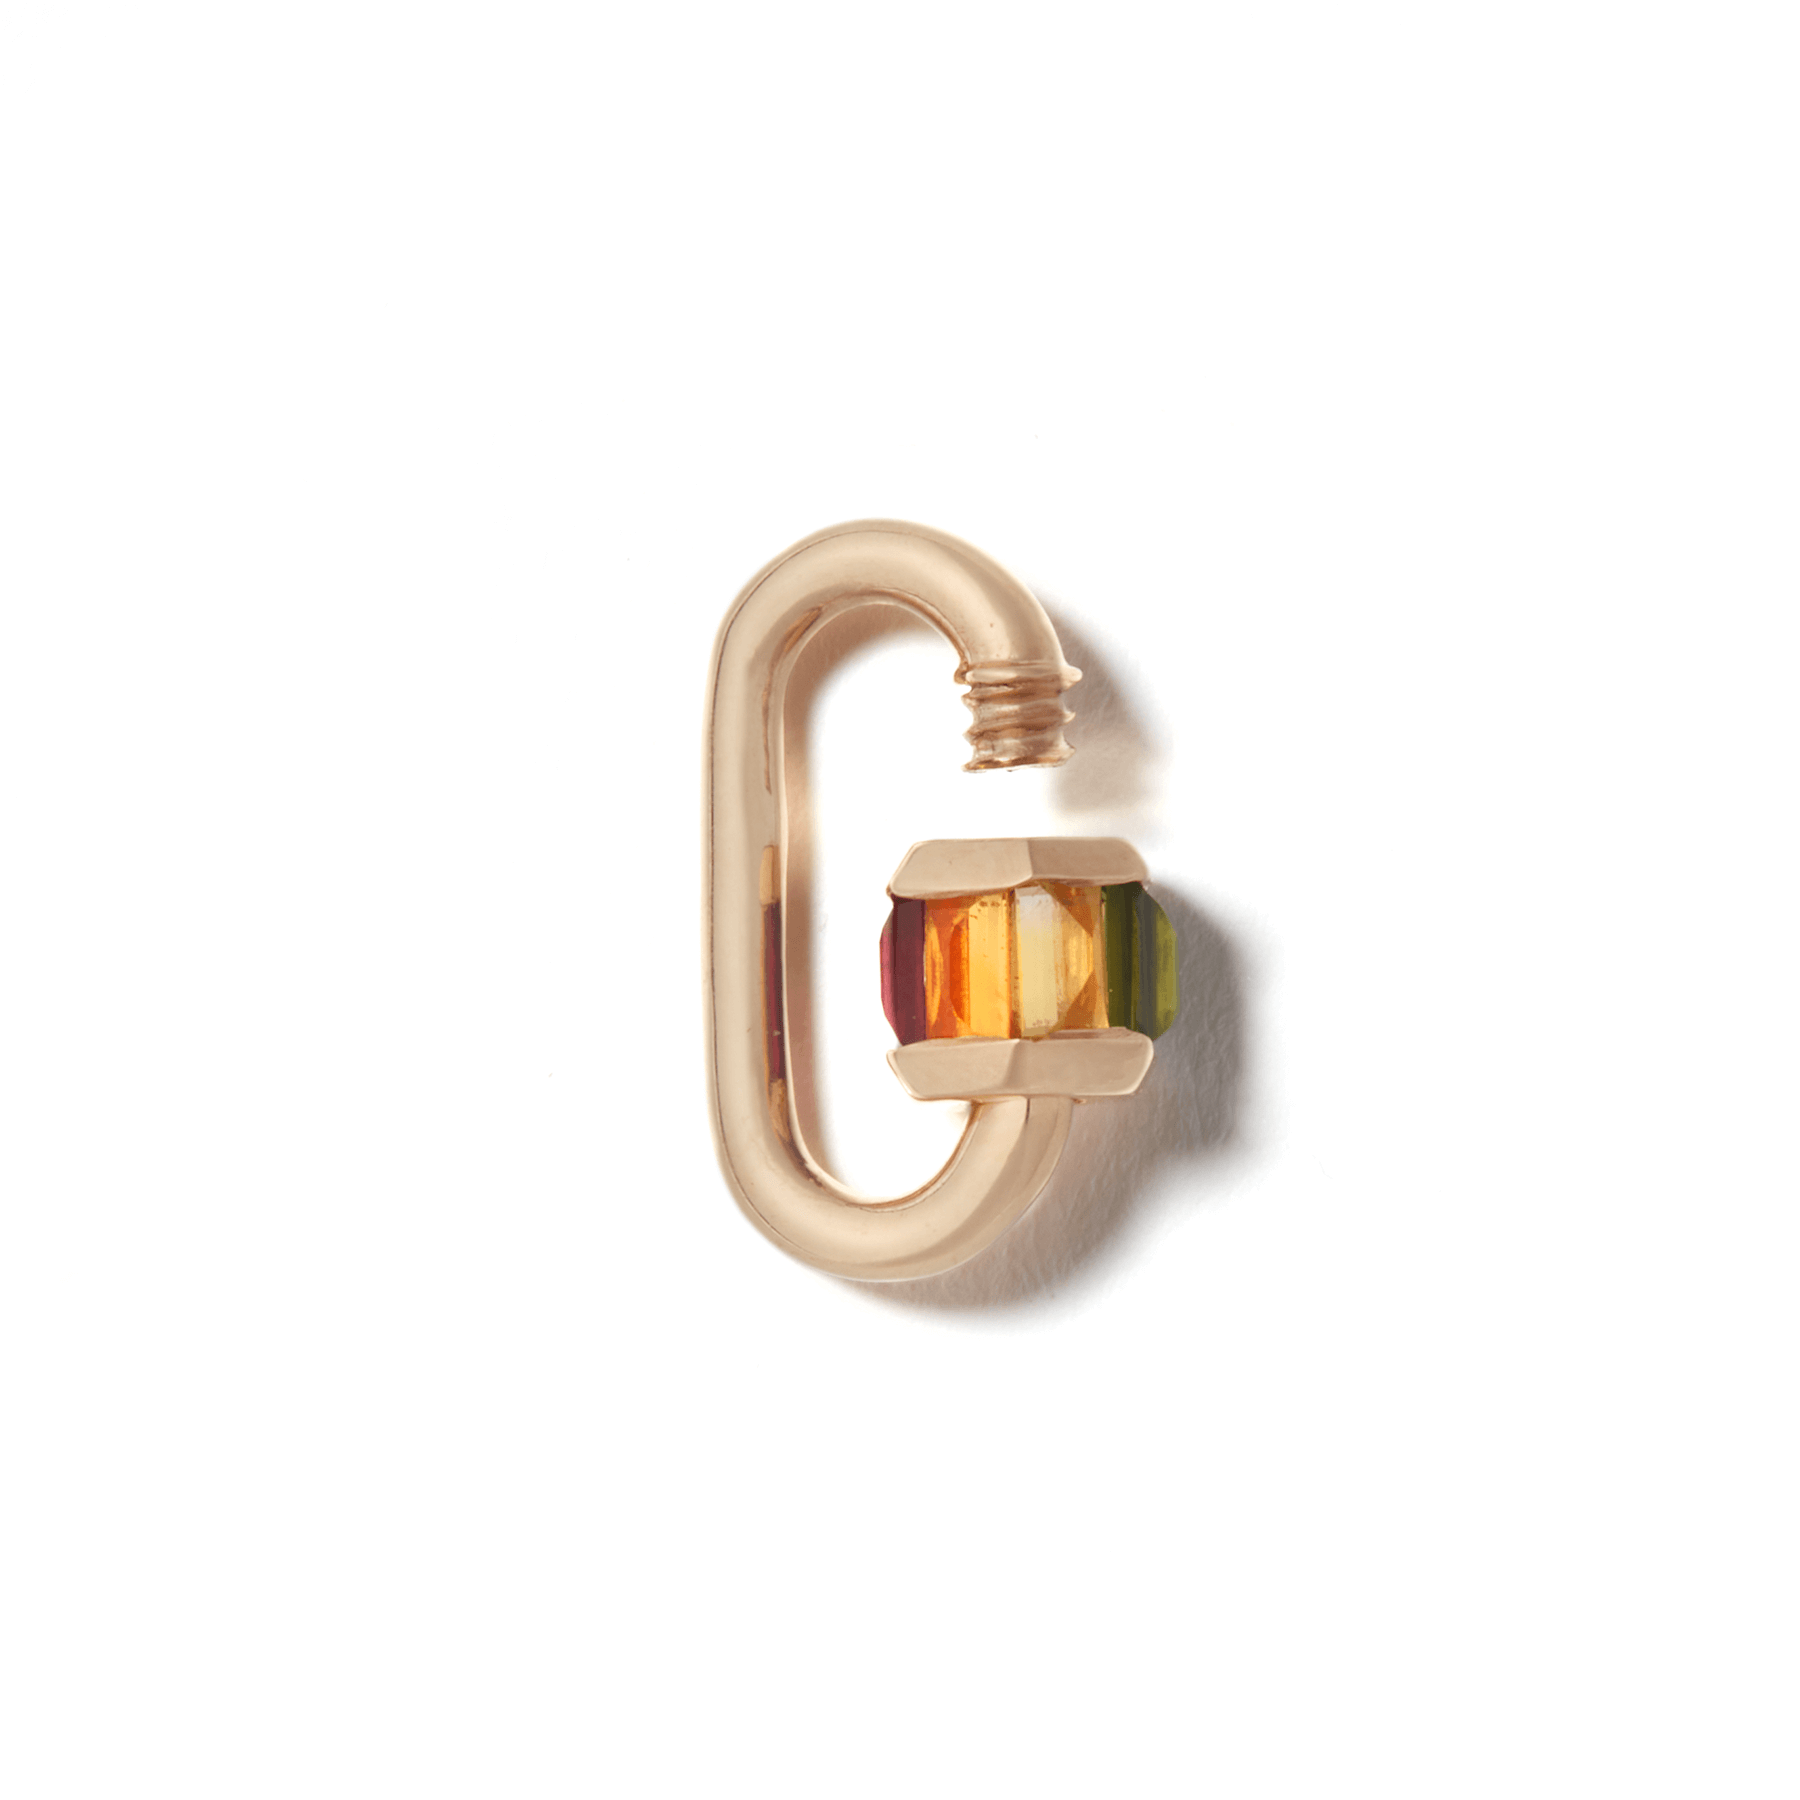 Gold roygbiv fine jewelry lock with open clasp against white backdrop 